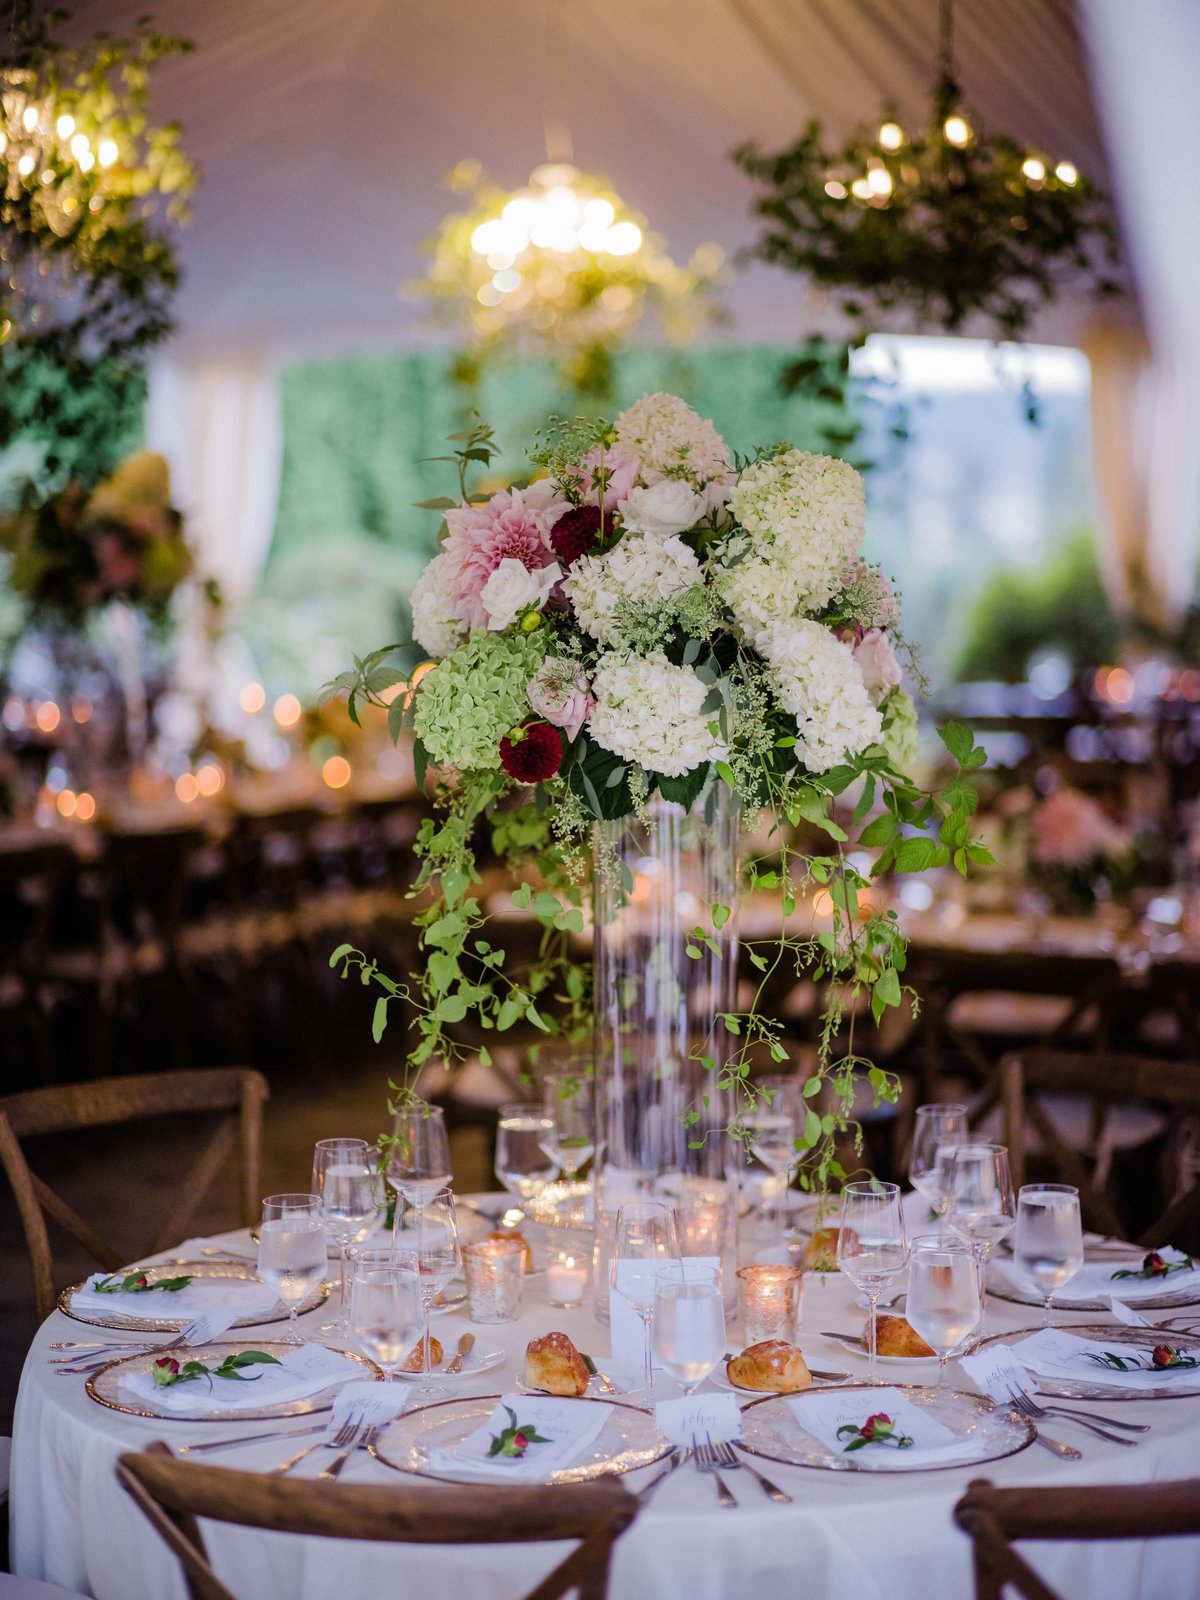 Romantic loose garden style tall vase arrangements look perfect in this tent wedding reception.